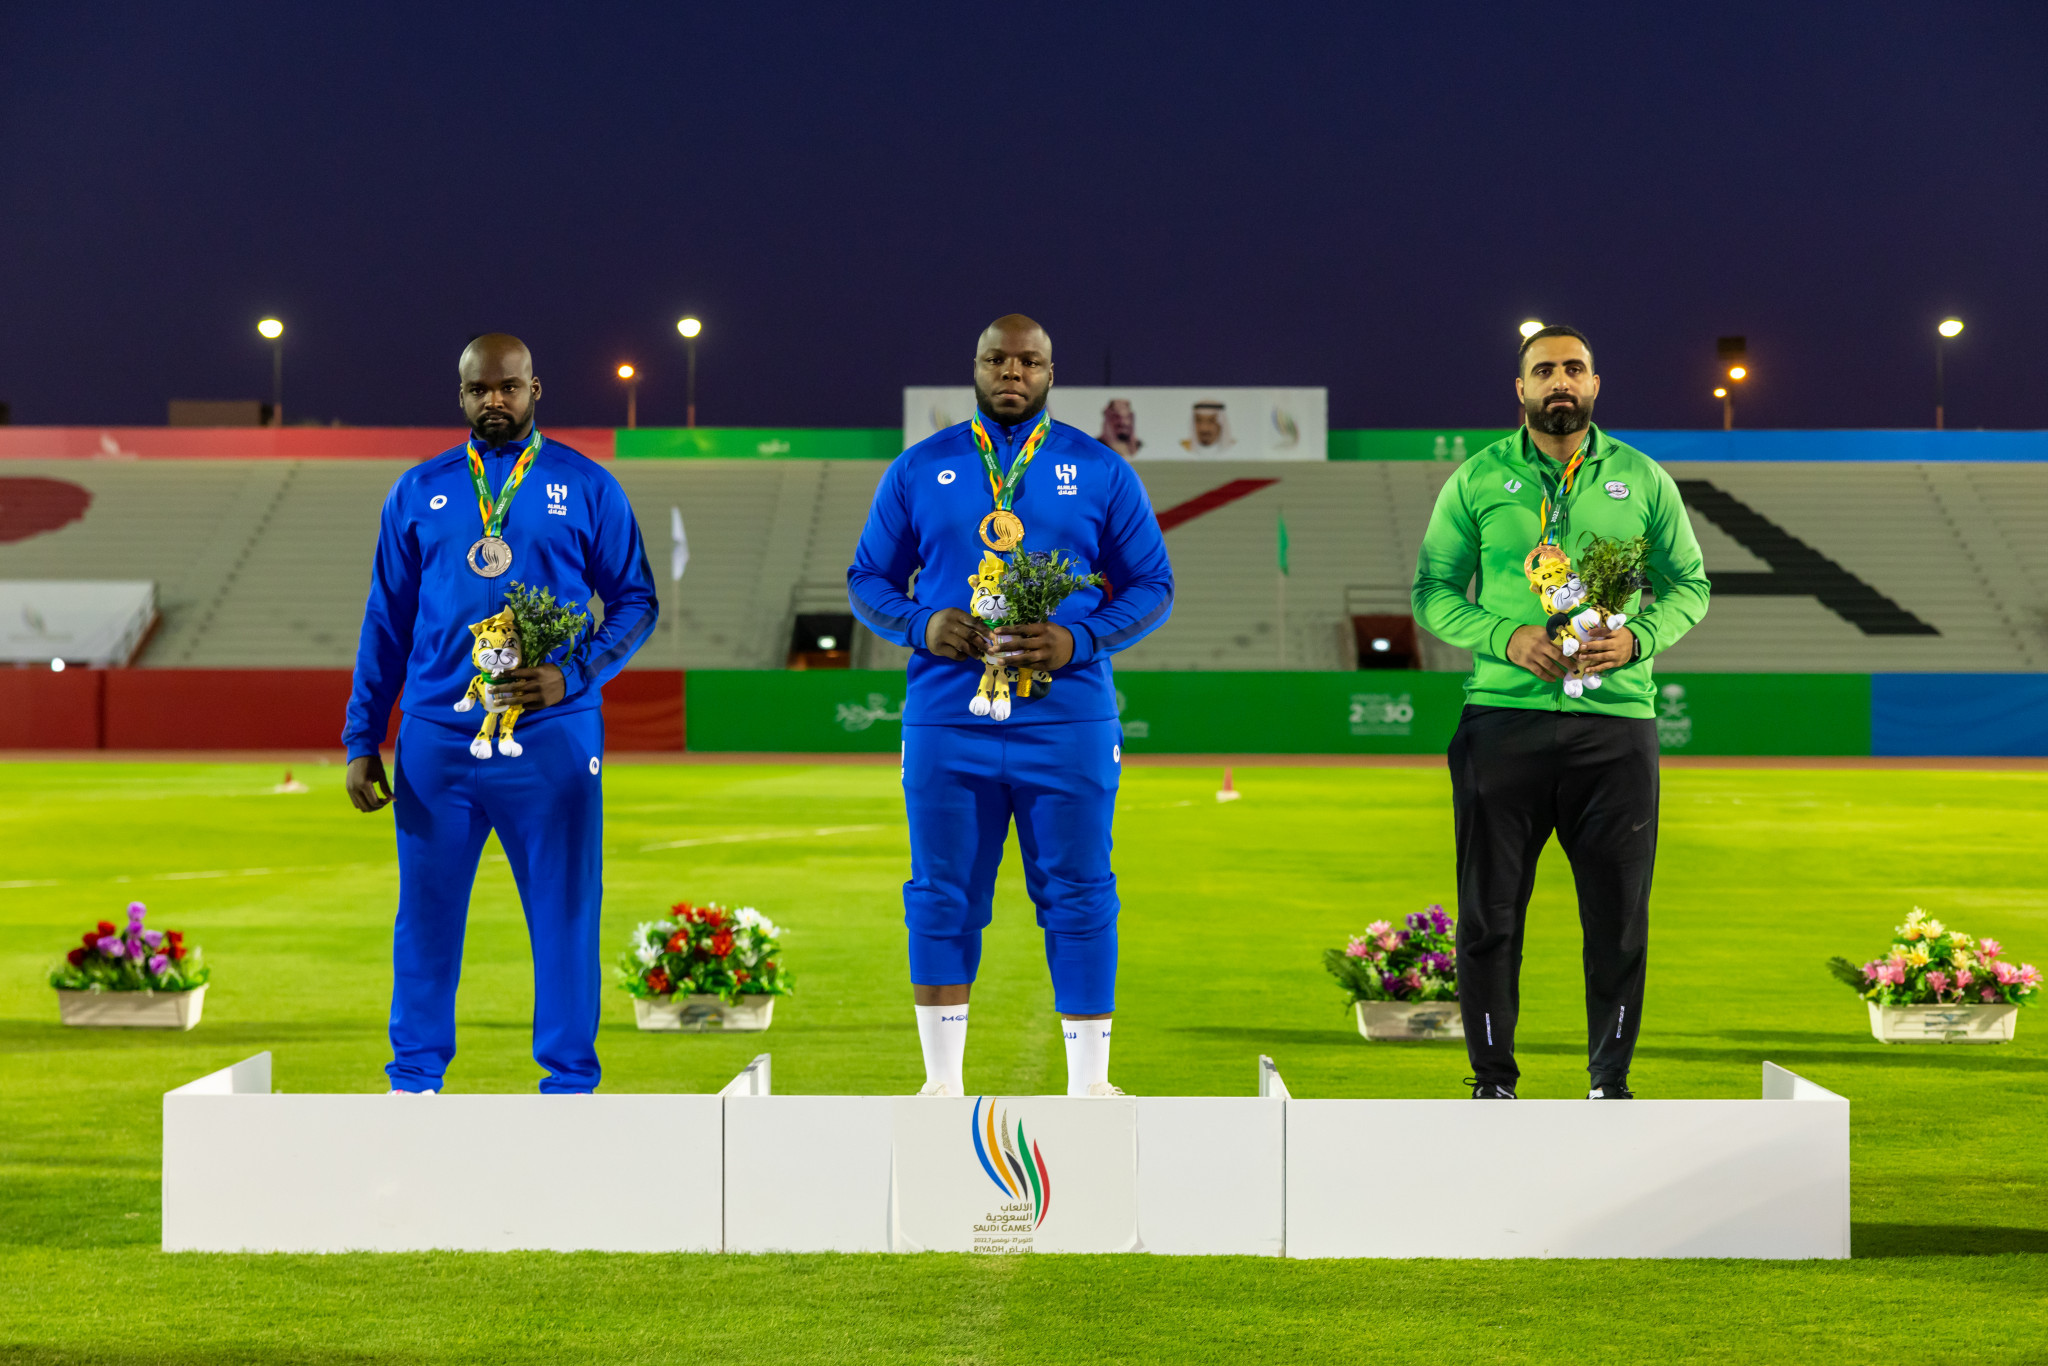 Mohammed and Tolo become two-time winners on final competition day at Saudi Games